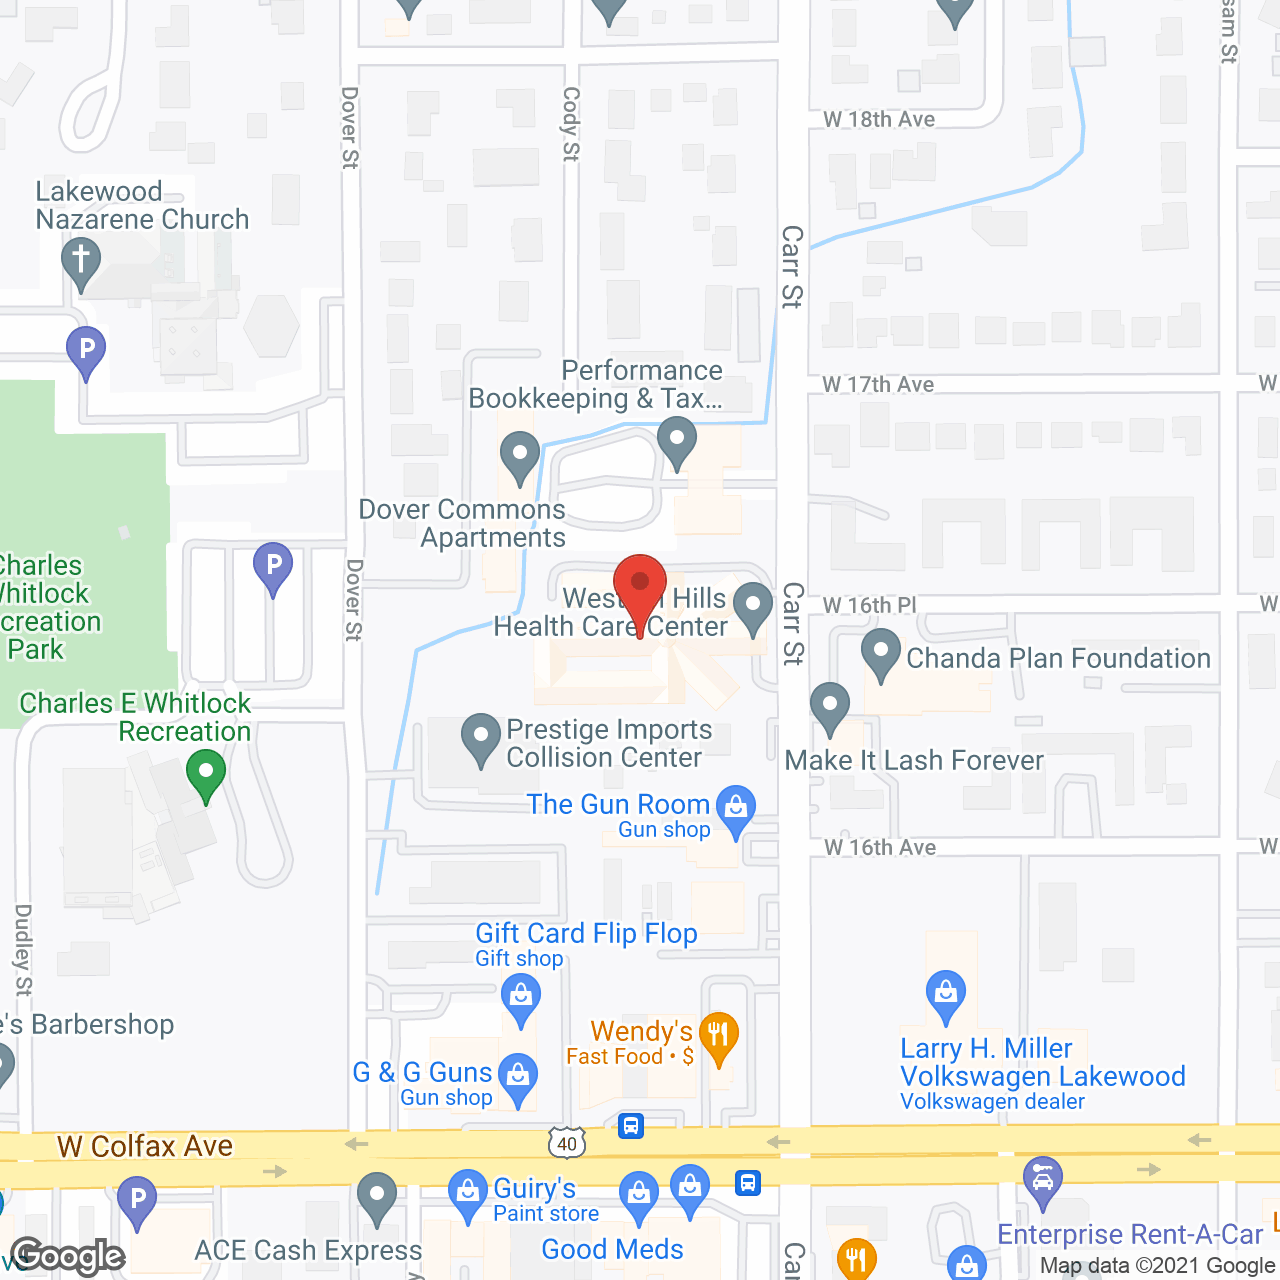 Western Hills Health Care Center in google map